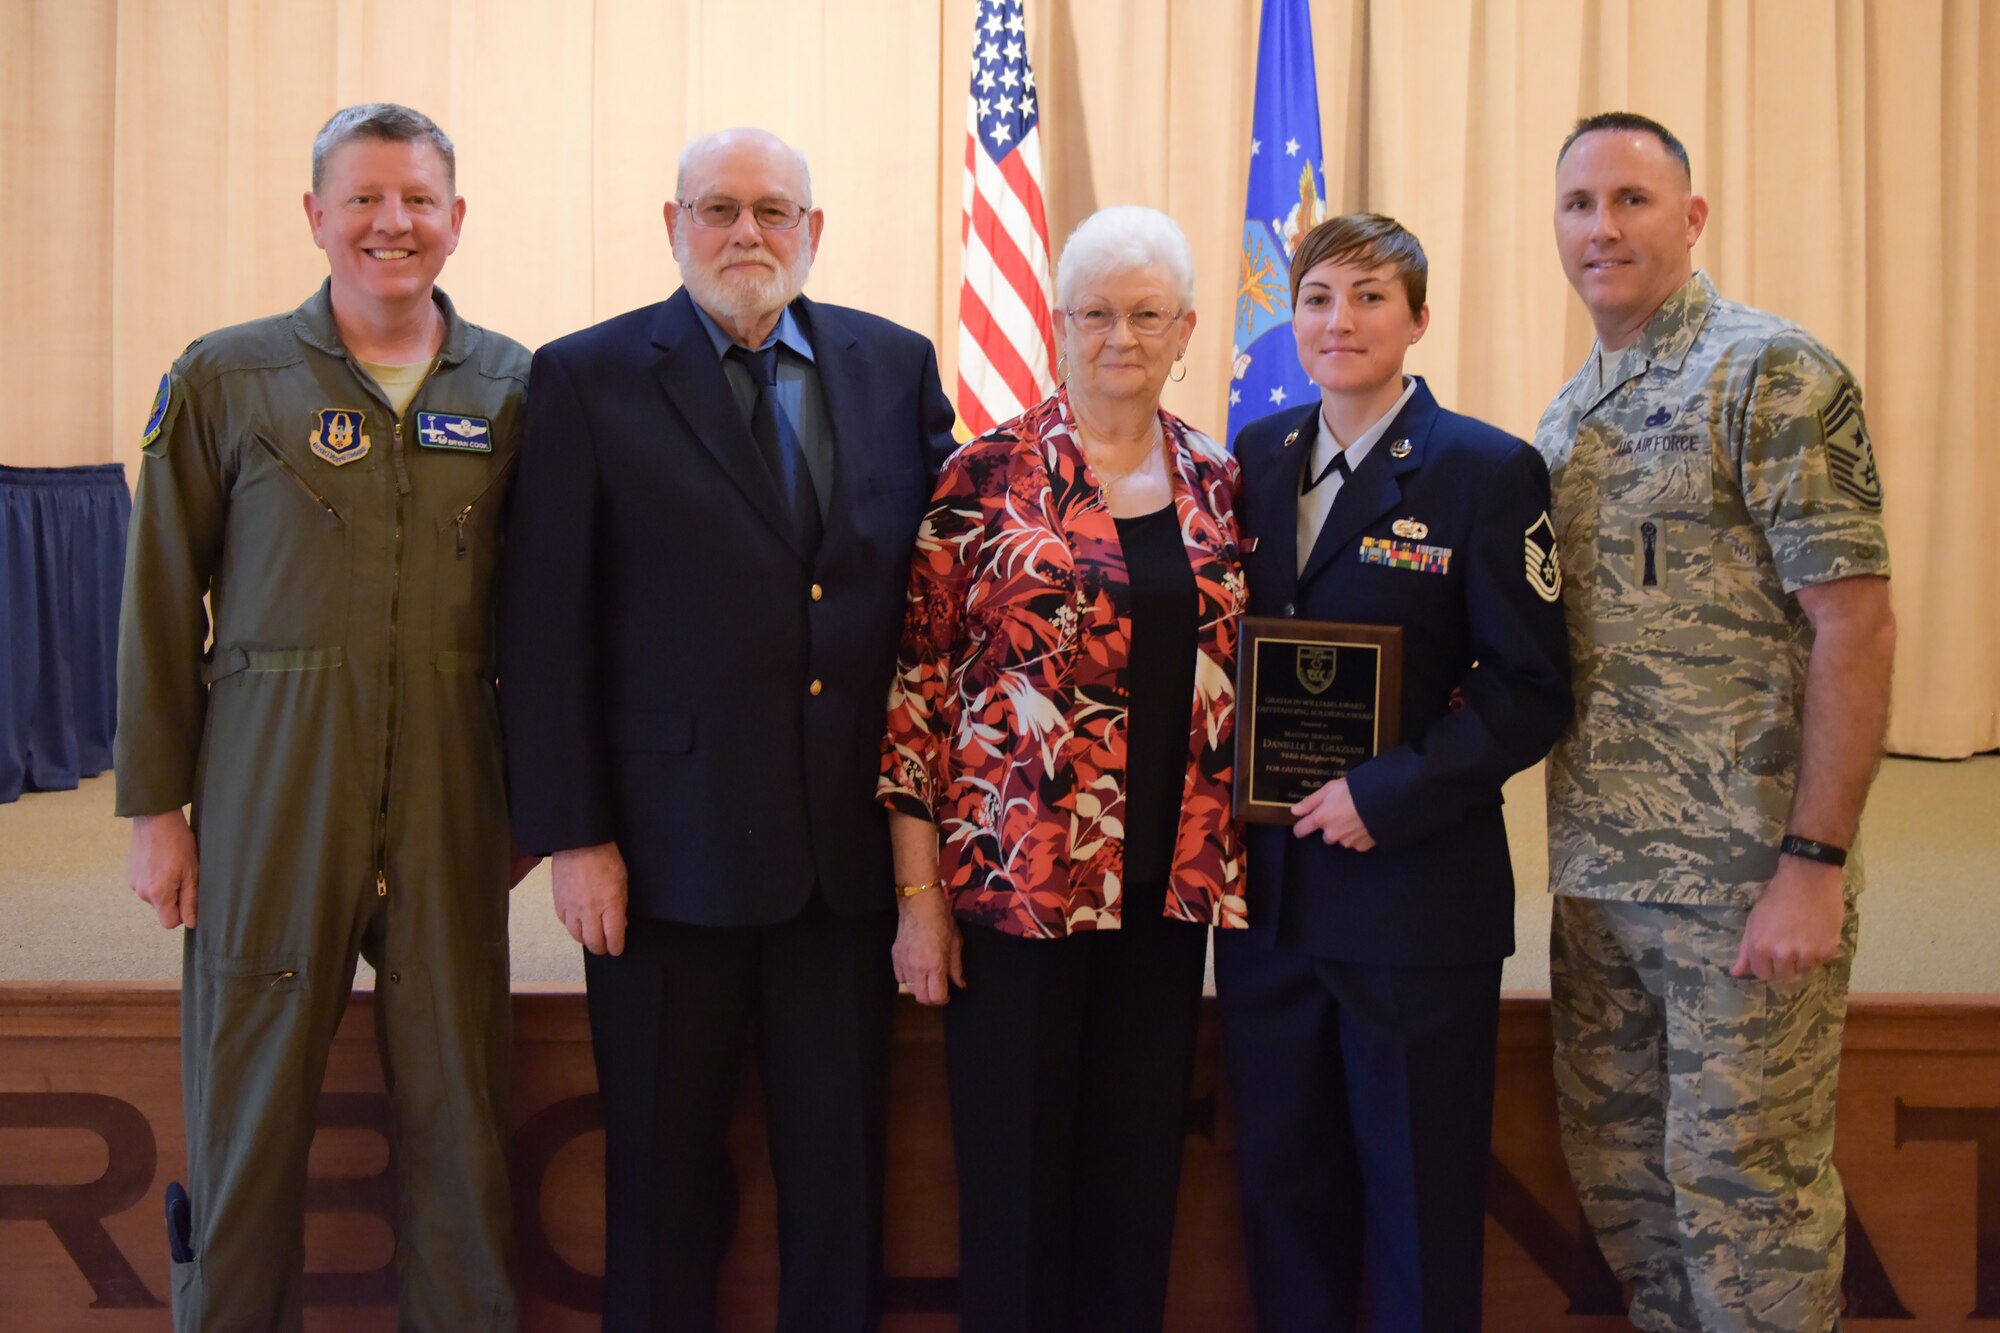 Master Sergeant Danielle Graziani, 944th Maintenance Squadron low observable section chief, was this year's Graydon William's Award winner.